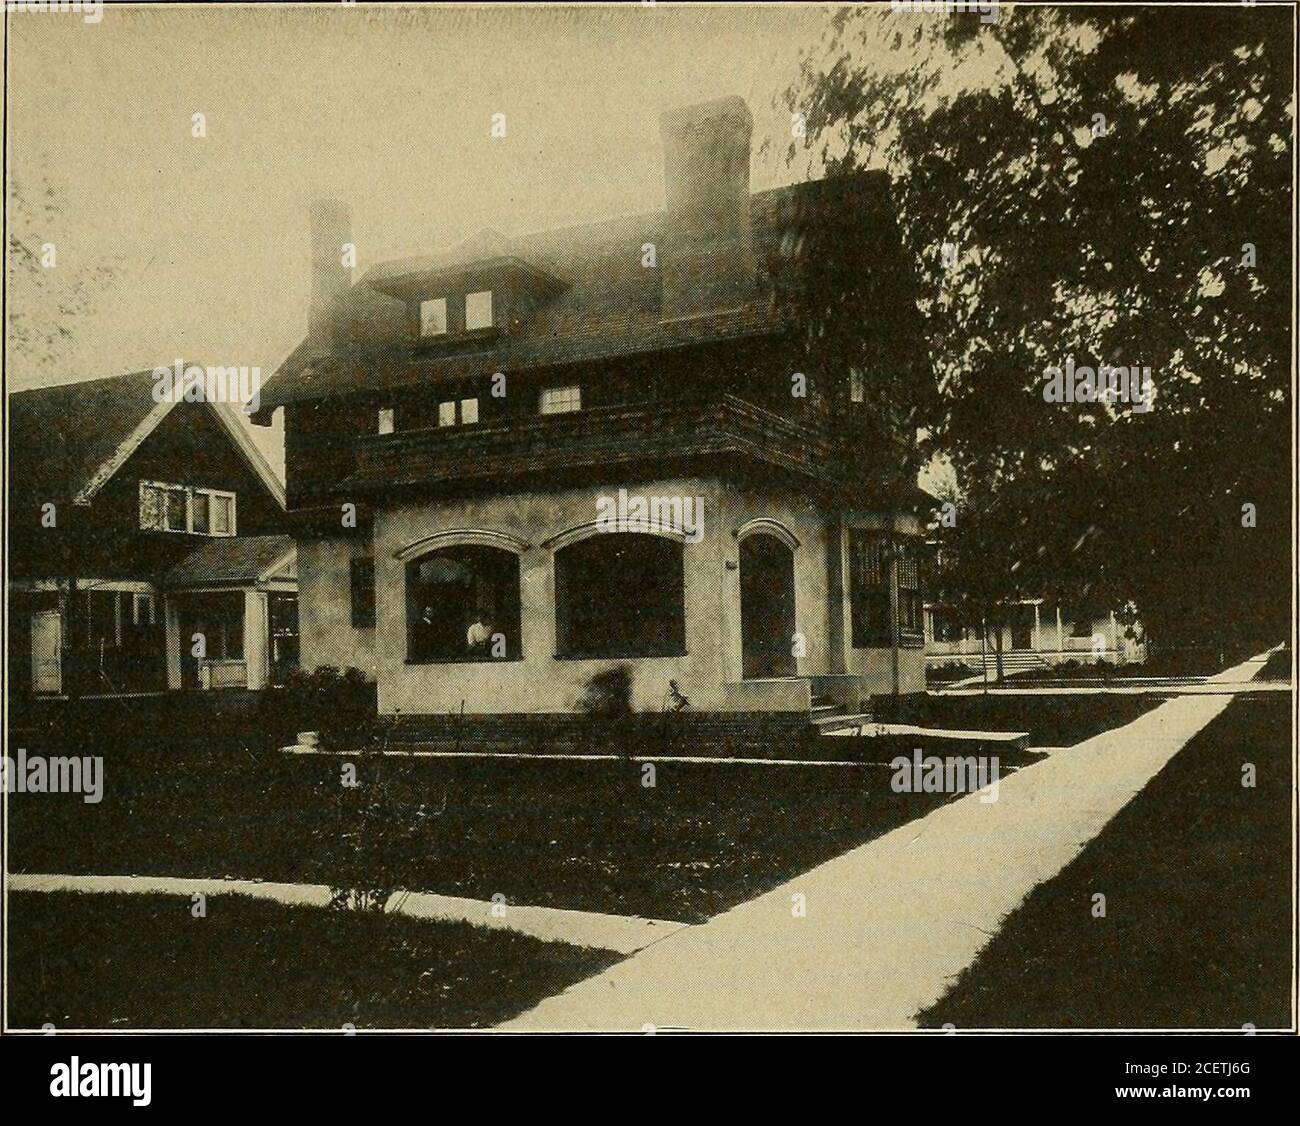 . Cyclopedia of architecture, carpentry, and building; a general reference work ... nuST FLC2Dia PLAN. RESIDENCE FOR MRS. THOS. G. GAGE, ROGERS PARK, CHICAGO. ILL. John B. Fischer, Architect, ChicagoThe Prtroh Faces East toward T^ako Michigan. v//////. Stock Photo